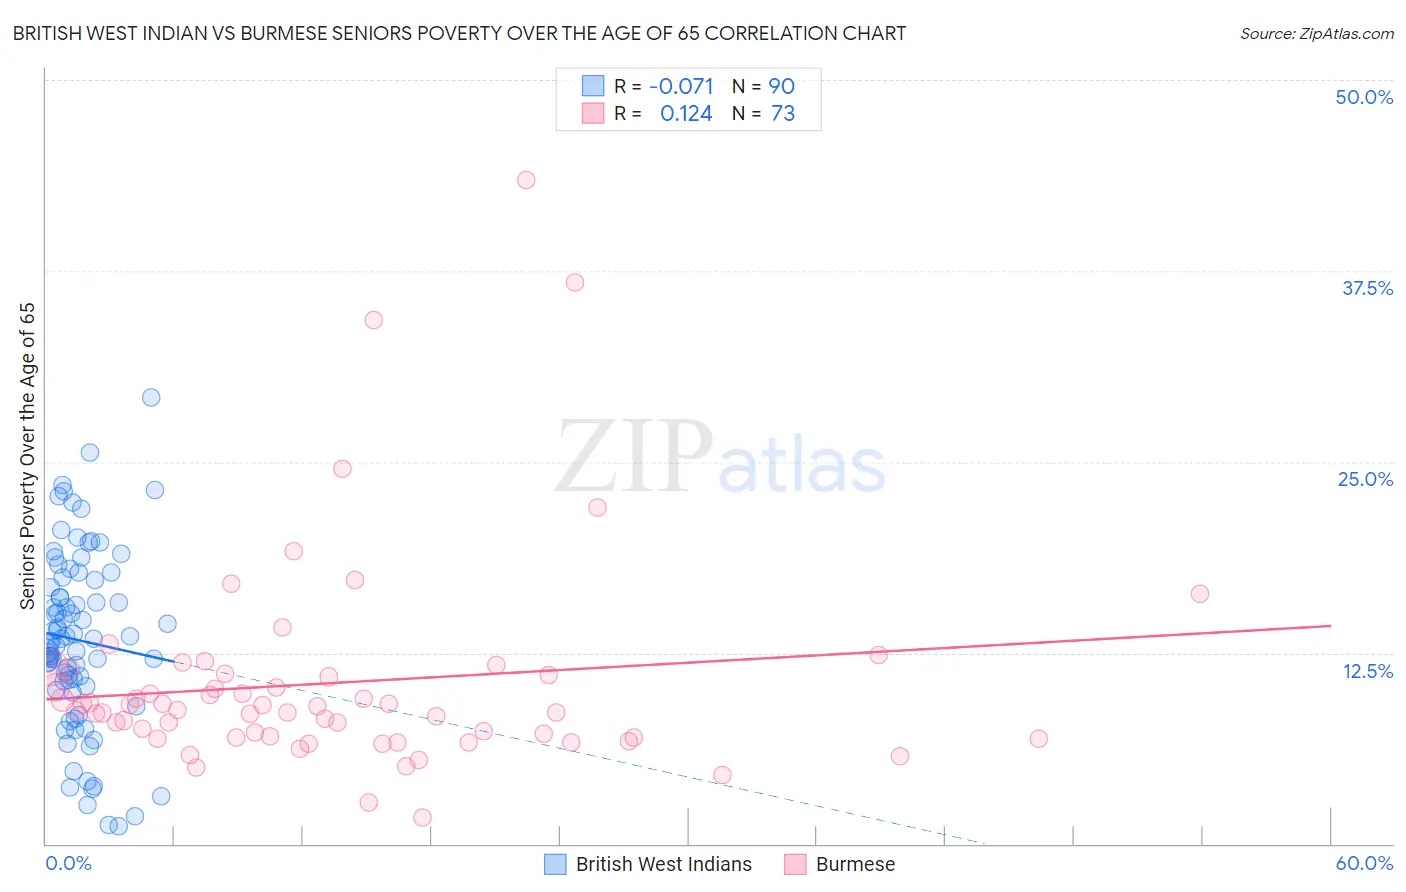 British West Indian vs Burmese Seniors Poverty Over the Age of 65